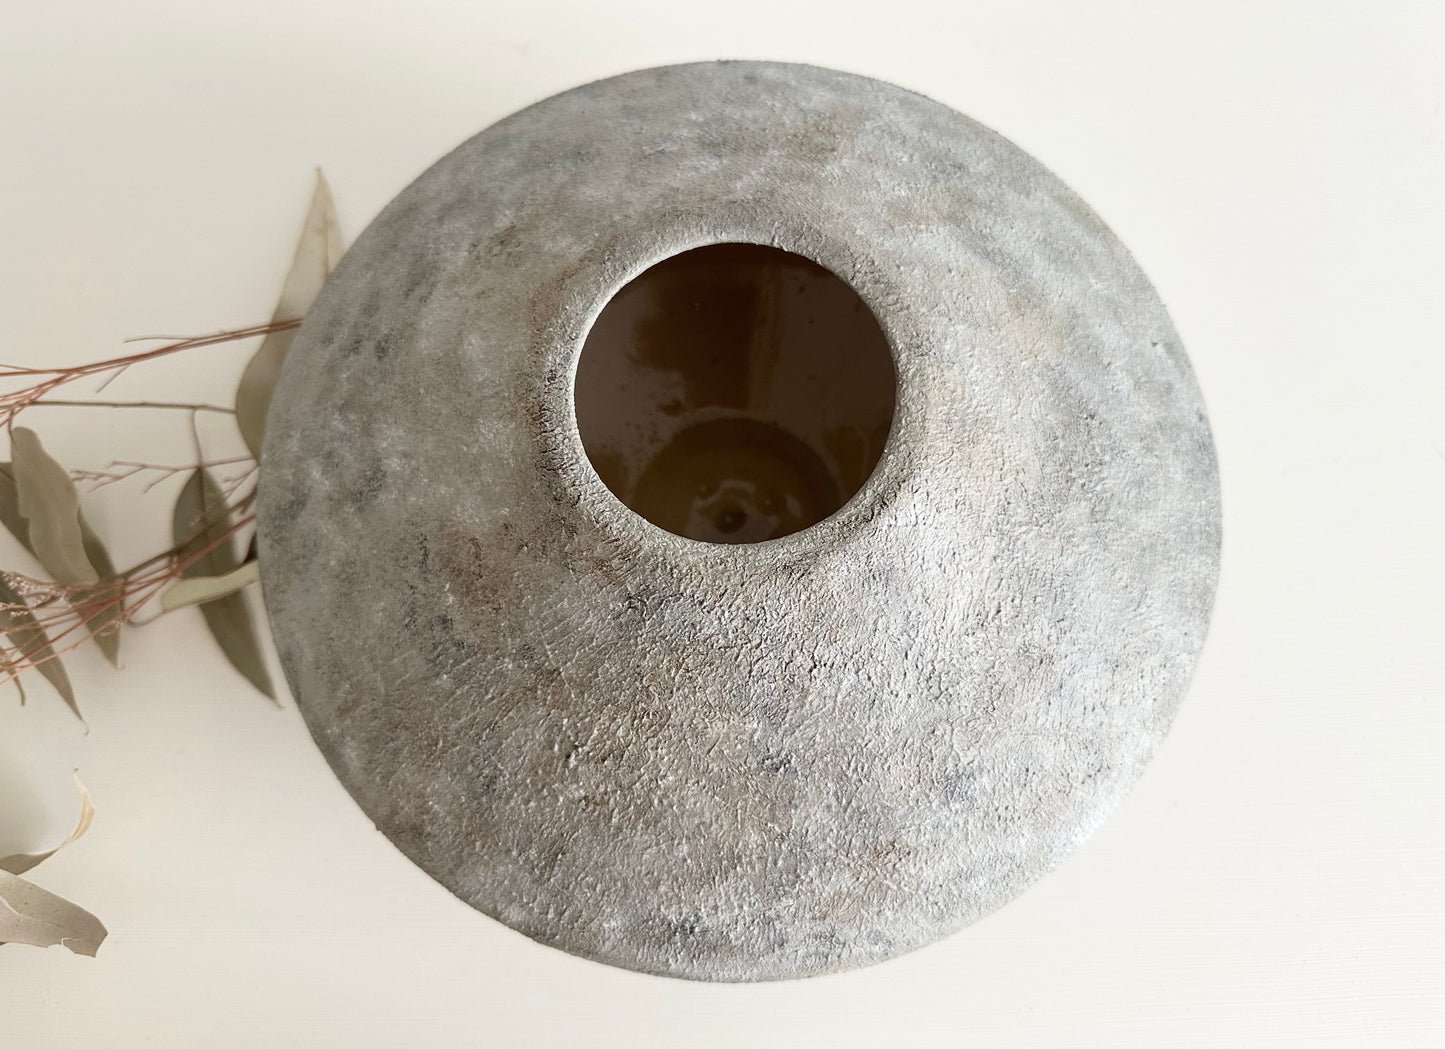 Abstract Stone Effect Vase